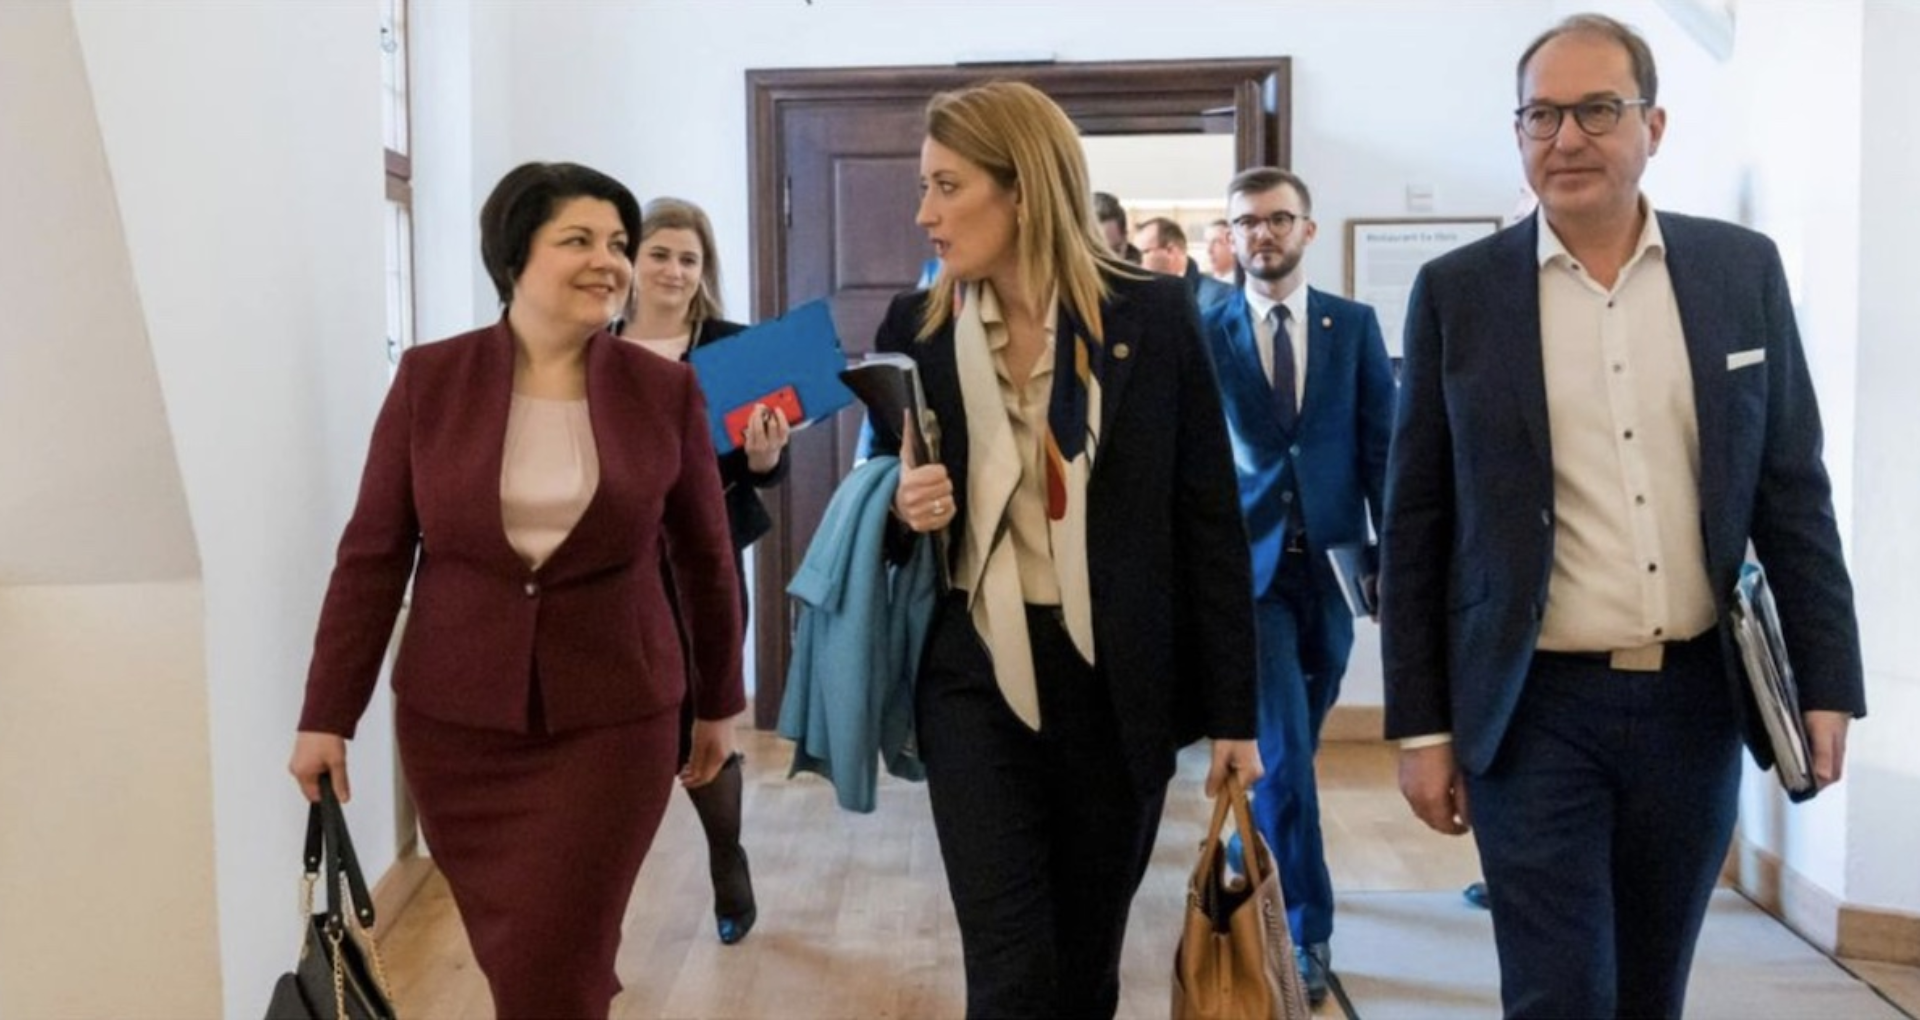 President of the European Parliament after meeting Natalia Gavrilița: “We will continue to support Moldova as a candidate country. We thank her for believing in Europe and supporting European values”